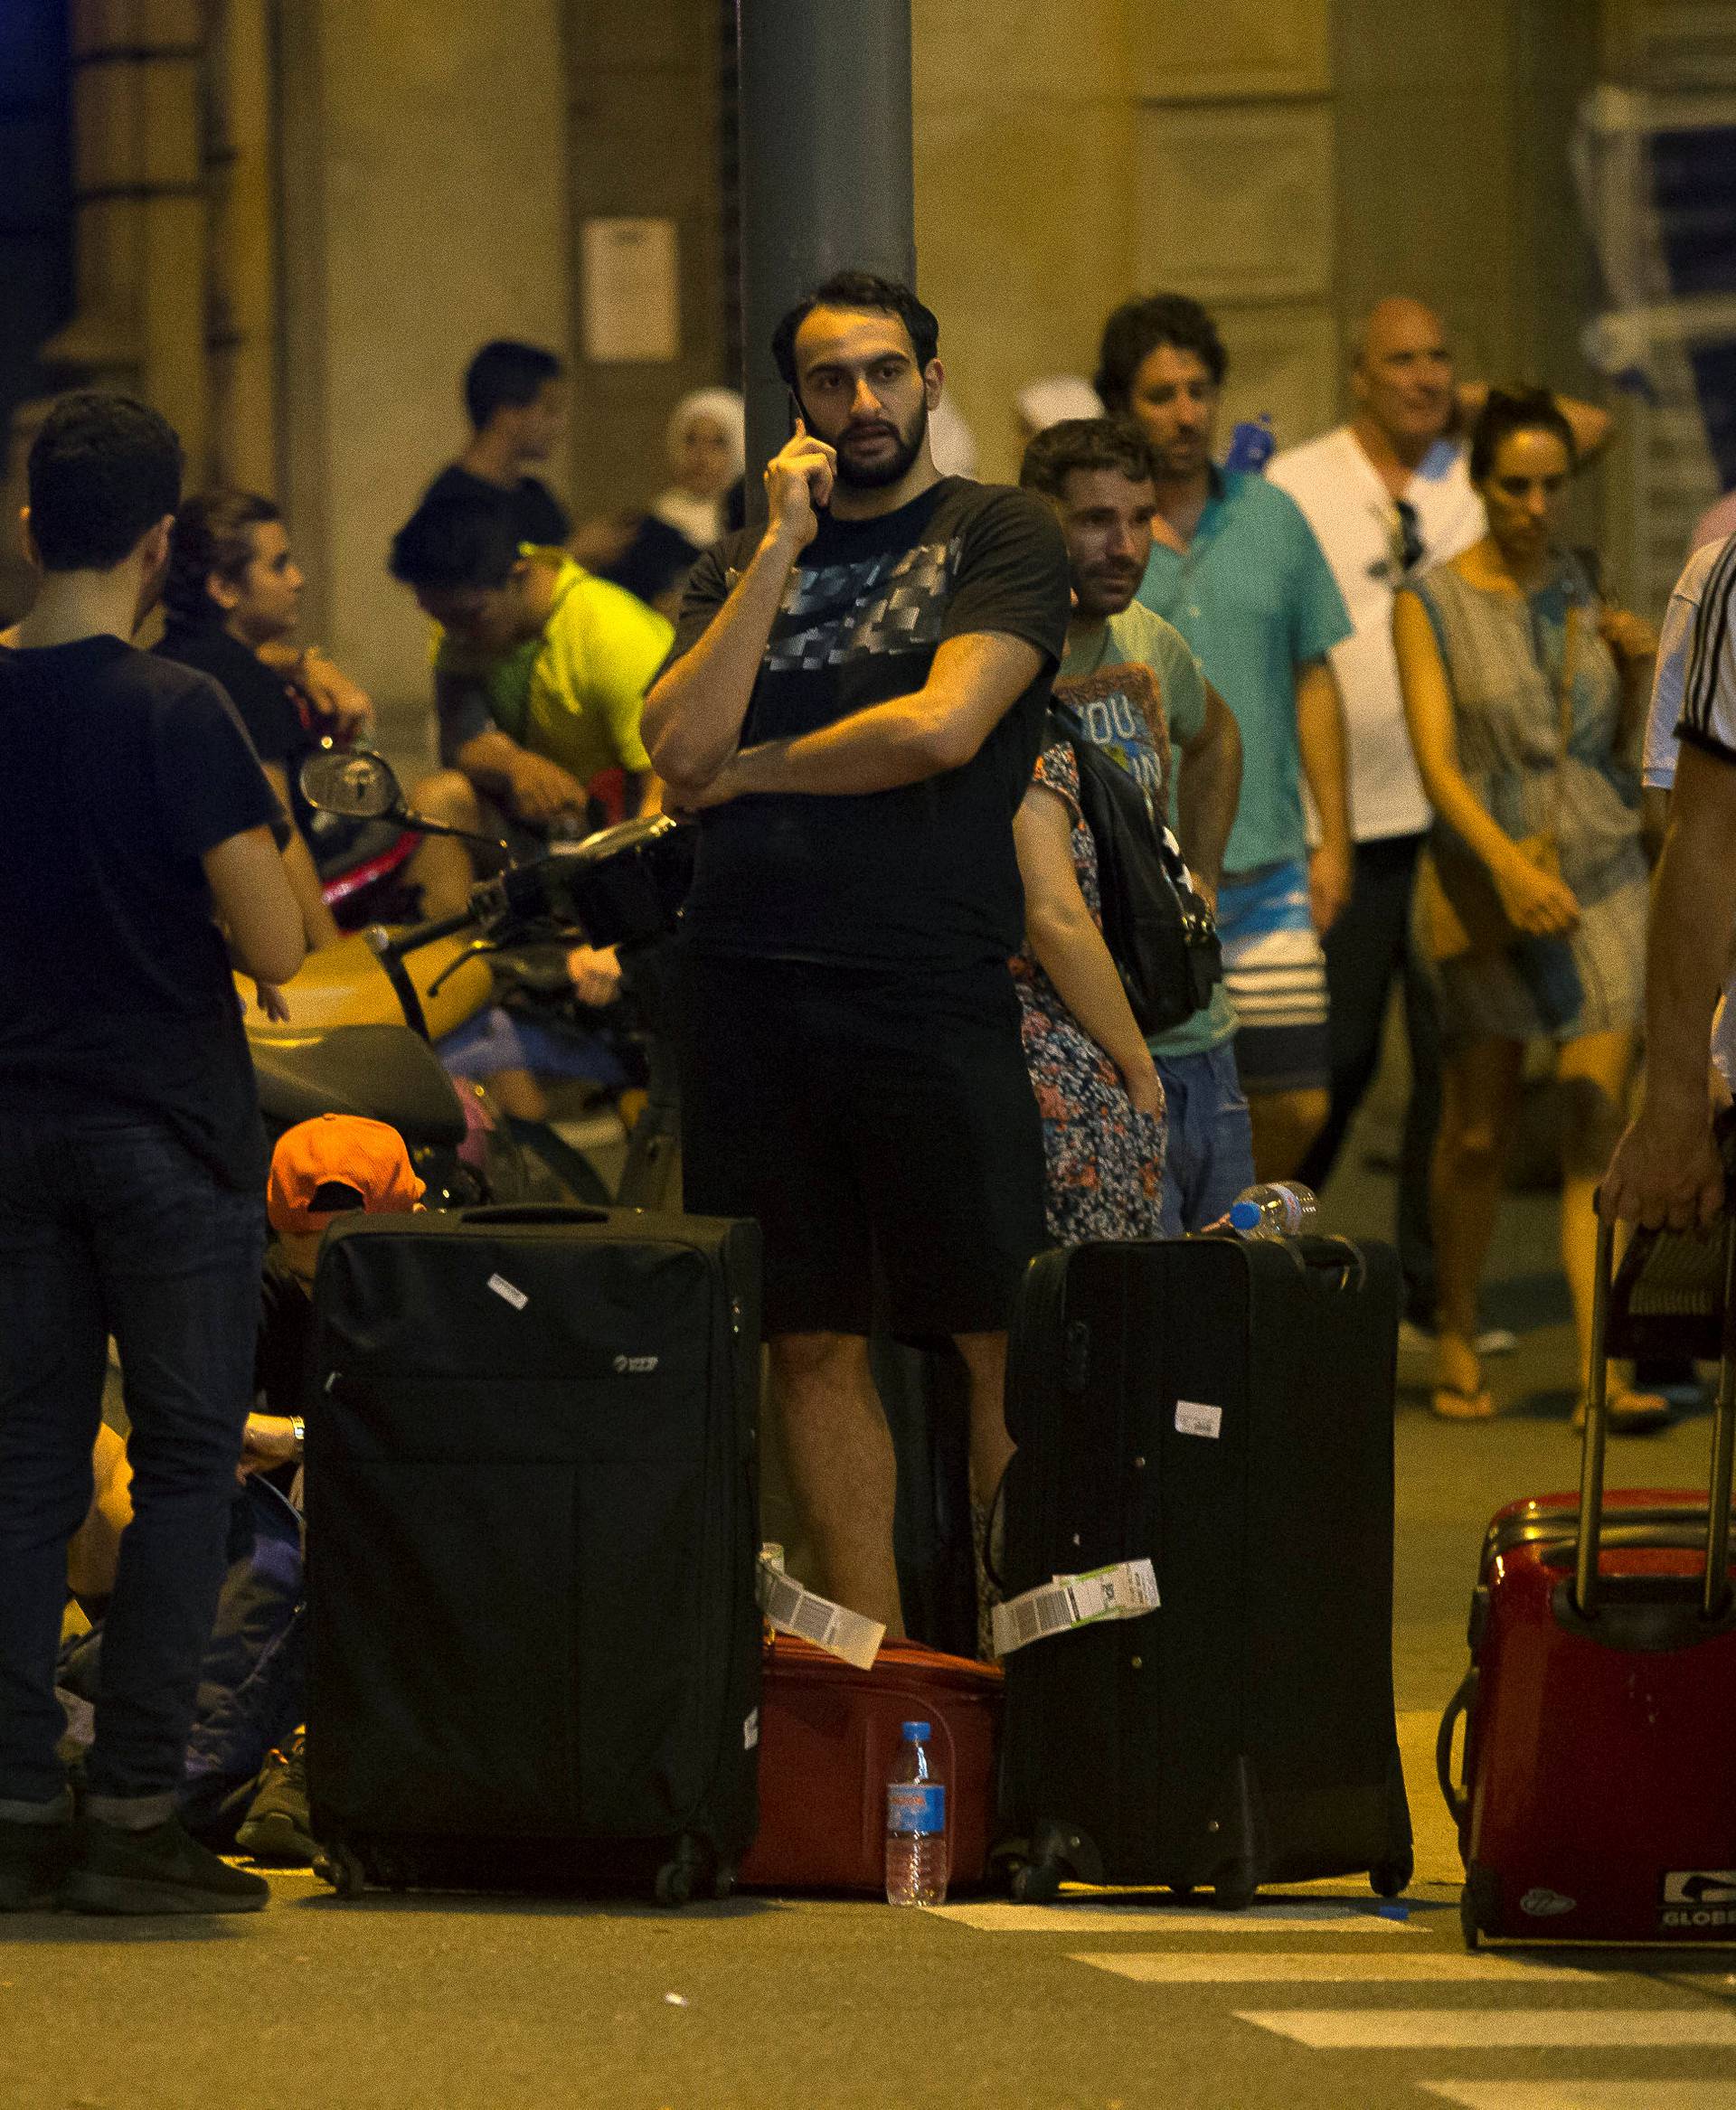 People wait to enter the area after a van crashed into pedestrians near the Las Ramblas avenue in central Barcelona